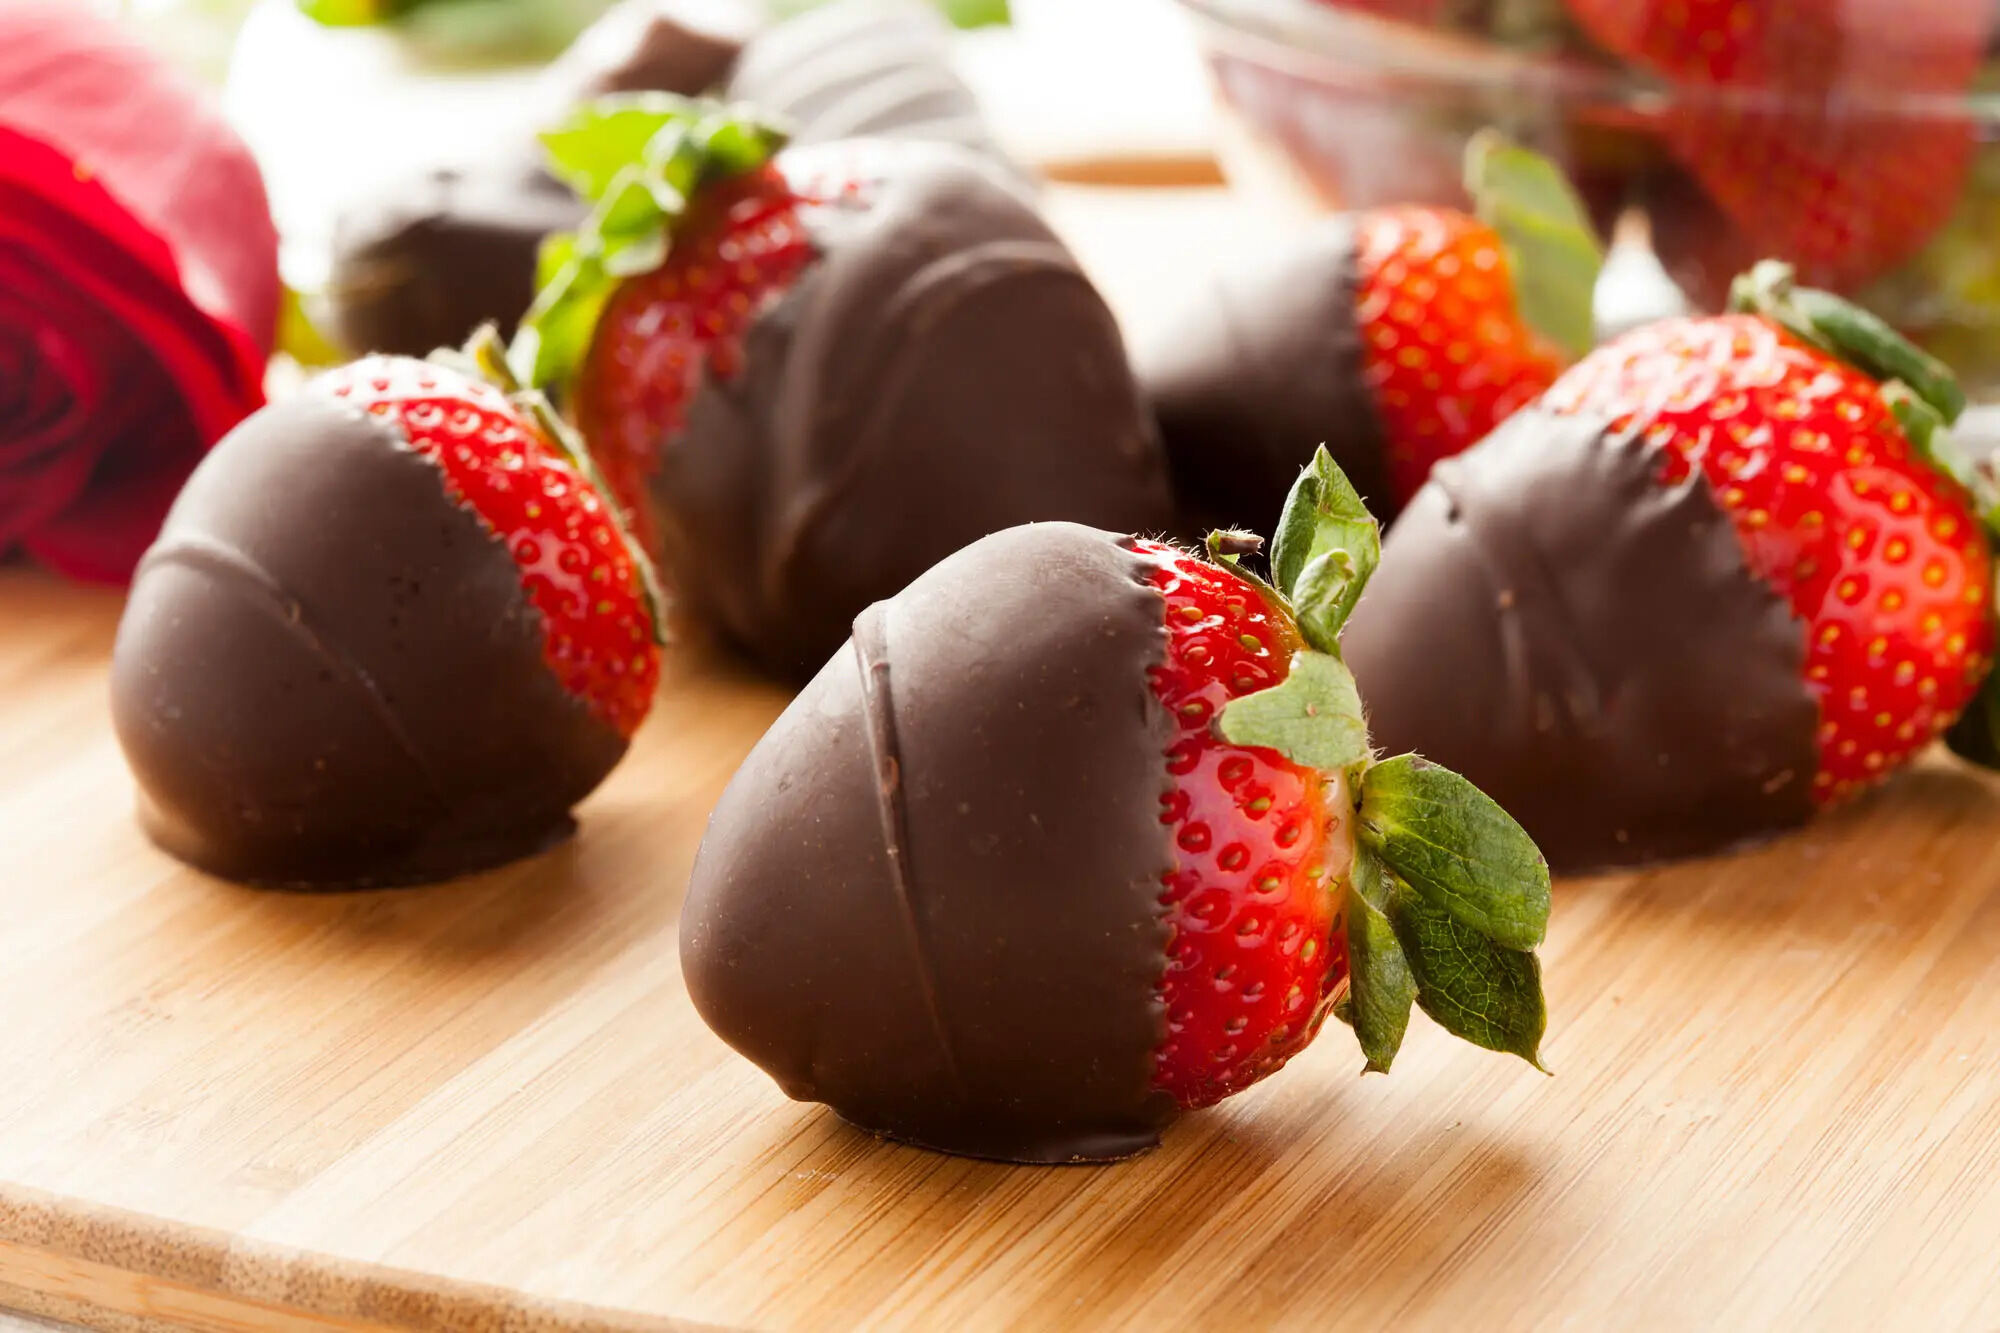 How To Store Chocolate Covered Strawberries